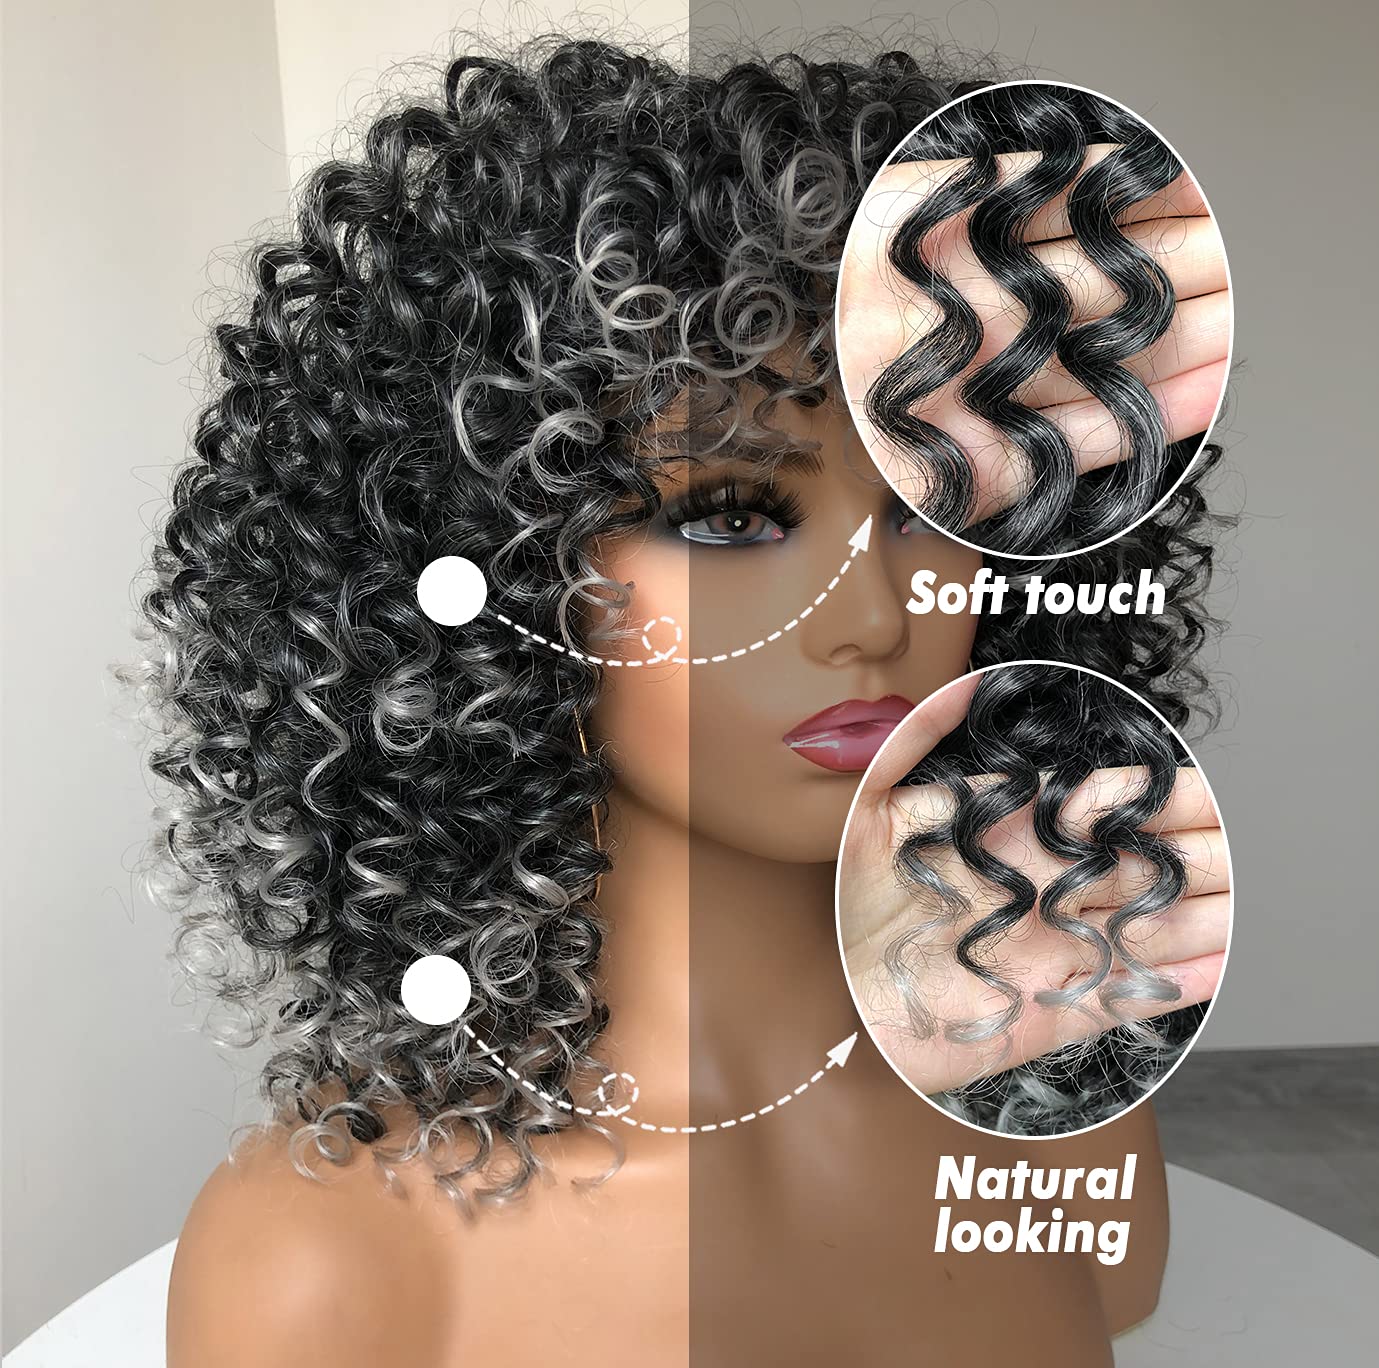 Short Curly Wigs With Bangs Afro Short Kinky Curly Big Bouncy Hair Wig 12inch in Front 14 inch Back